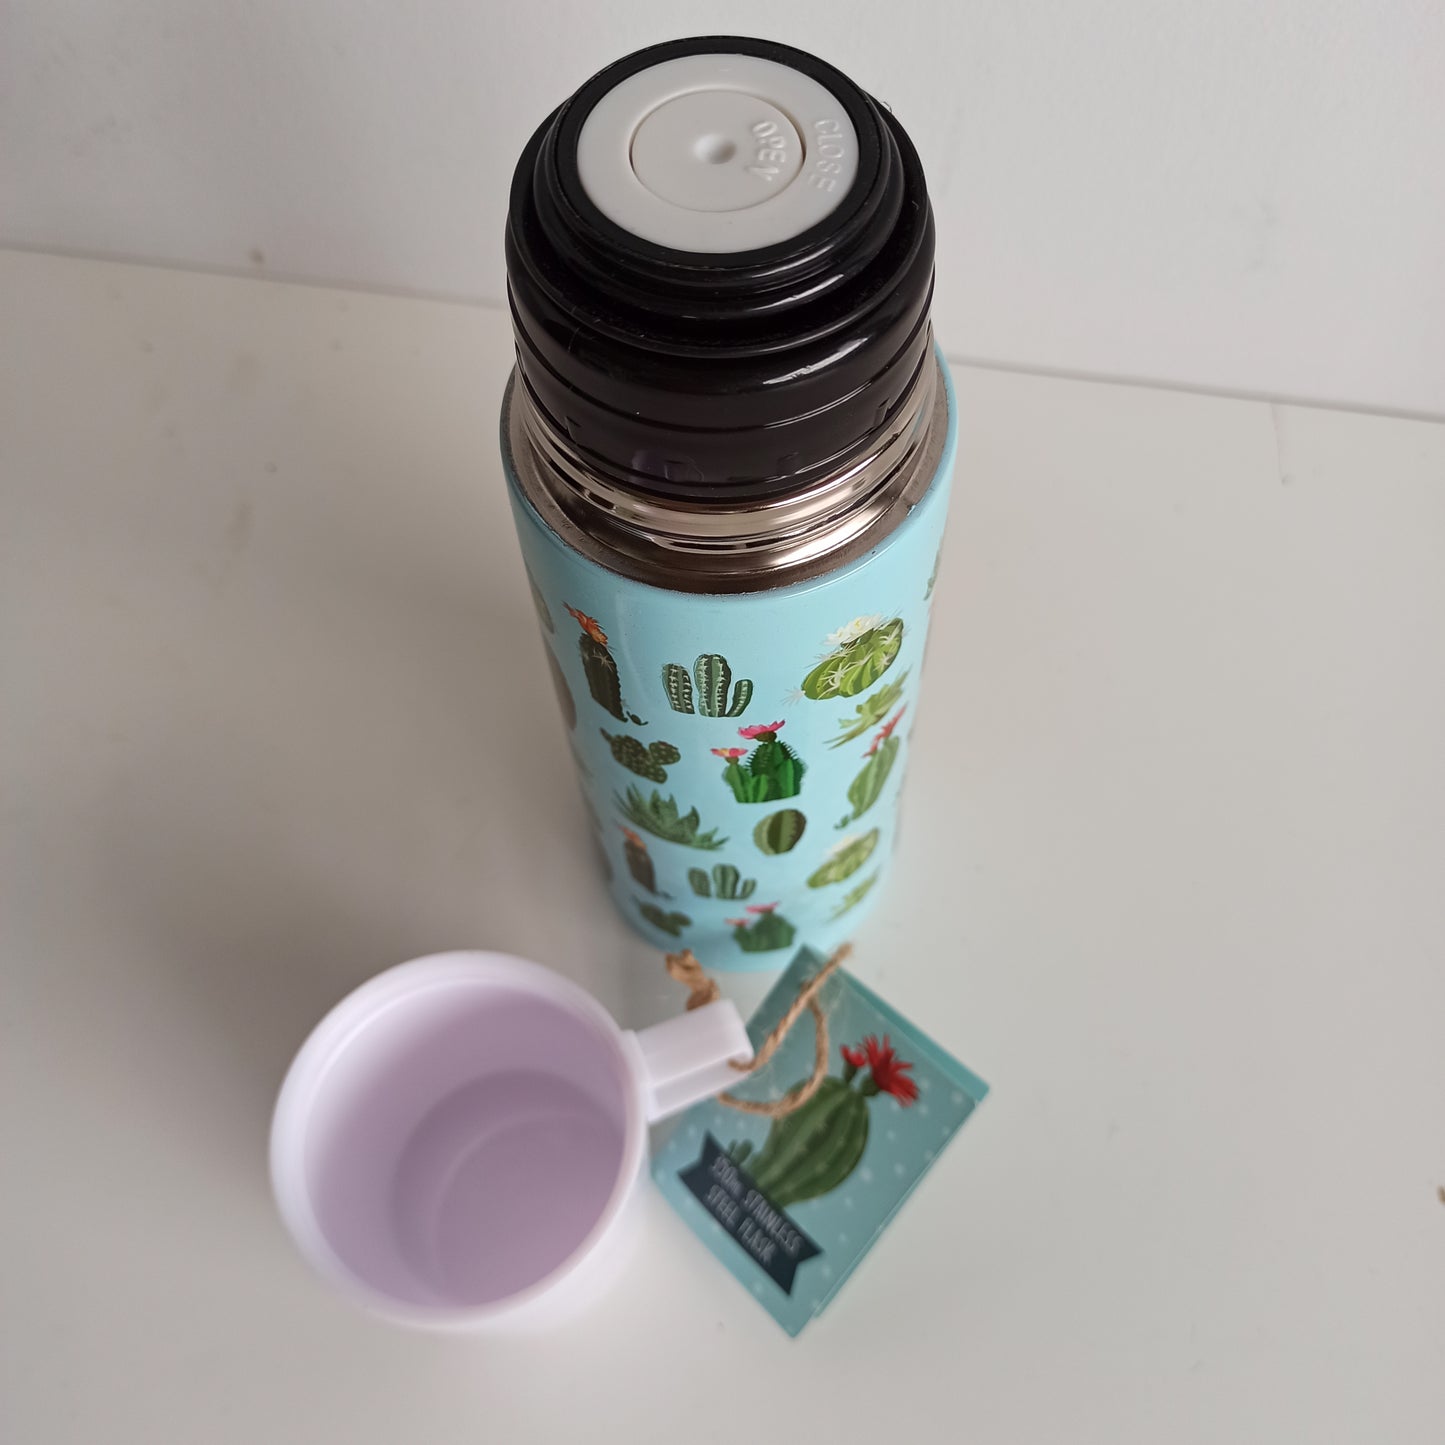 Stainless steel thermos. 350ml